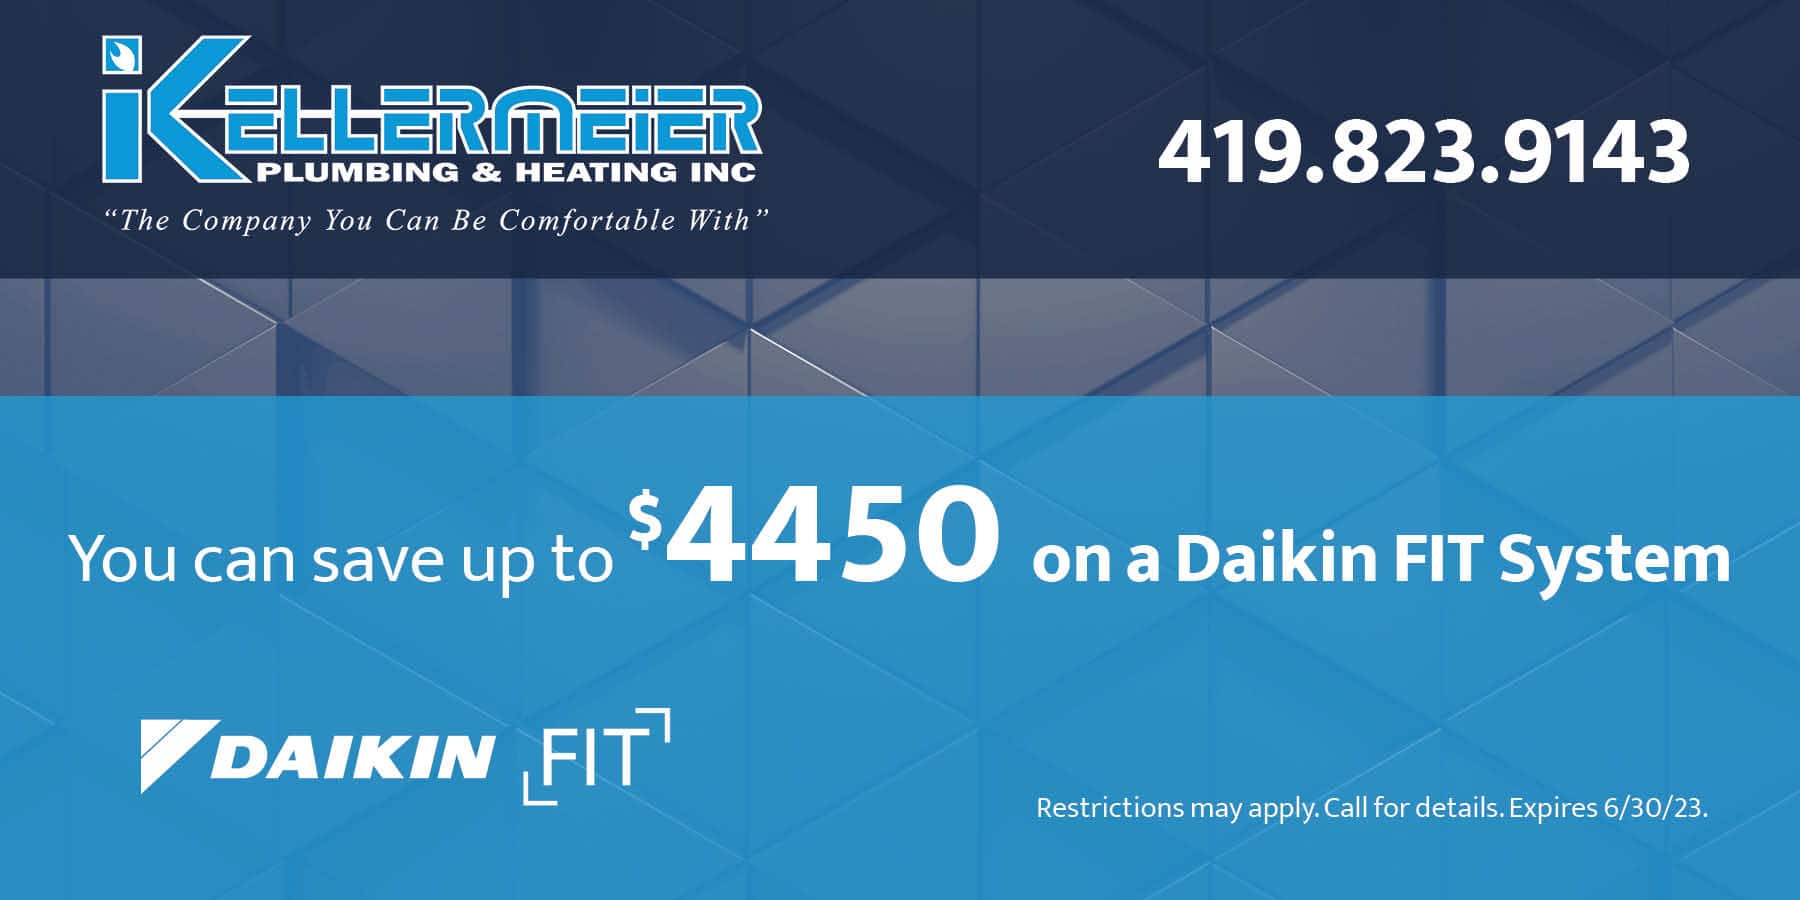 Save up to $4450 on a Daikin Fit System expires: 6/30/23.